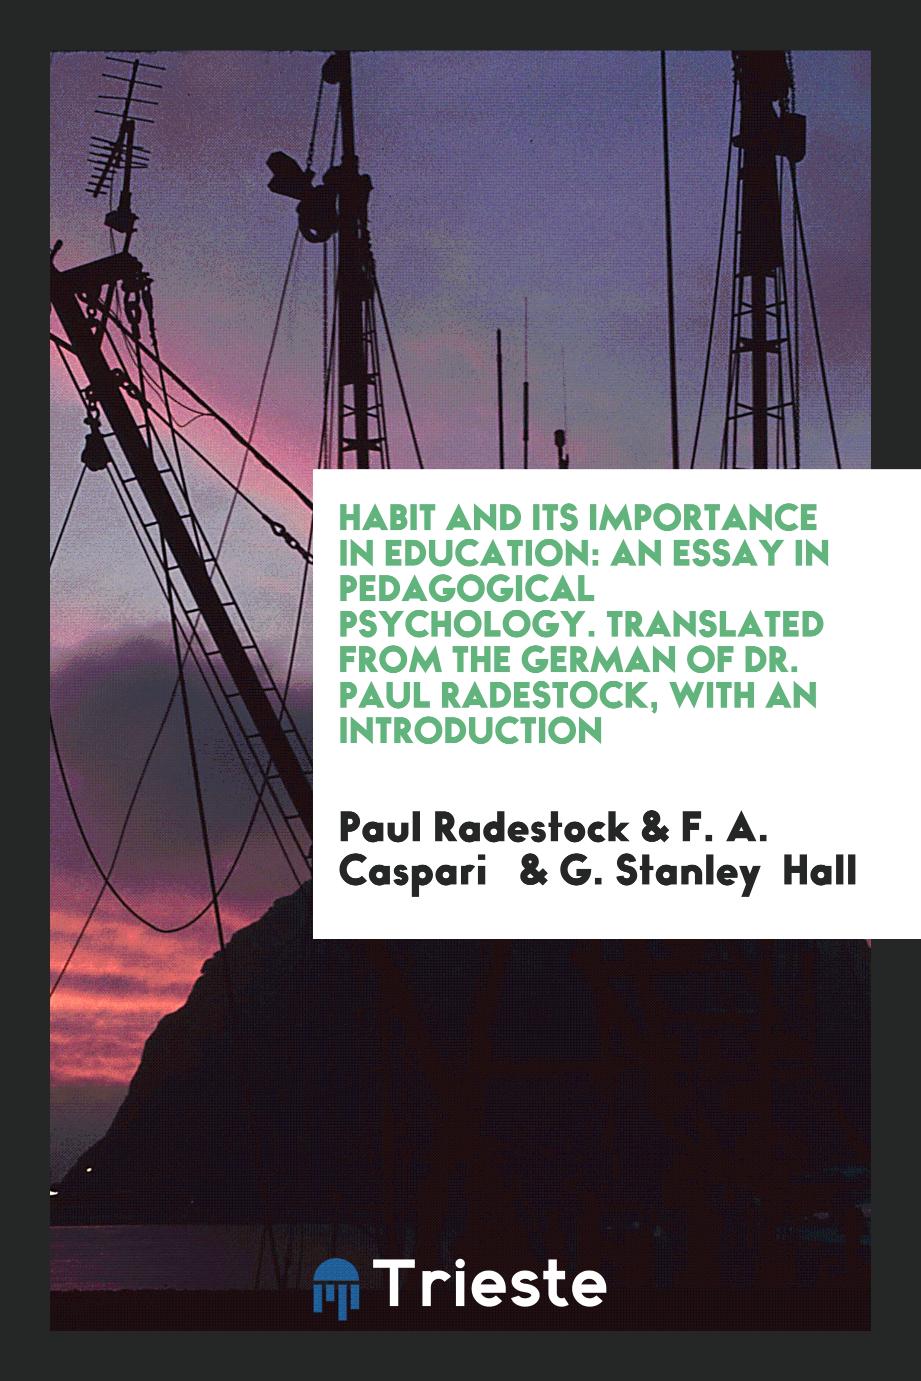 Habit and Its Importance in Education: An Essay in Pedagogical Psychology. Translated from the German of Dr. Paul Radestock, with an Introduction